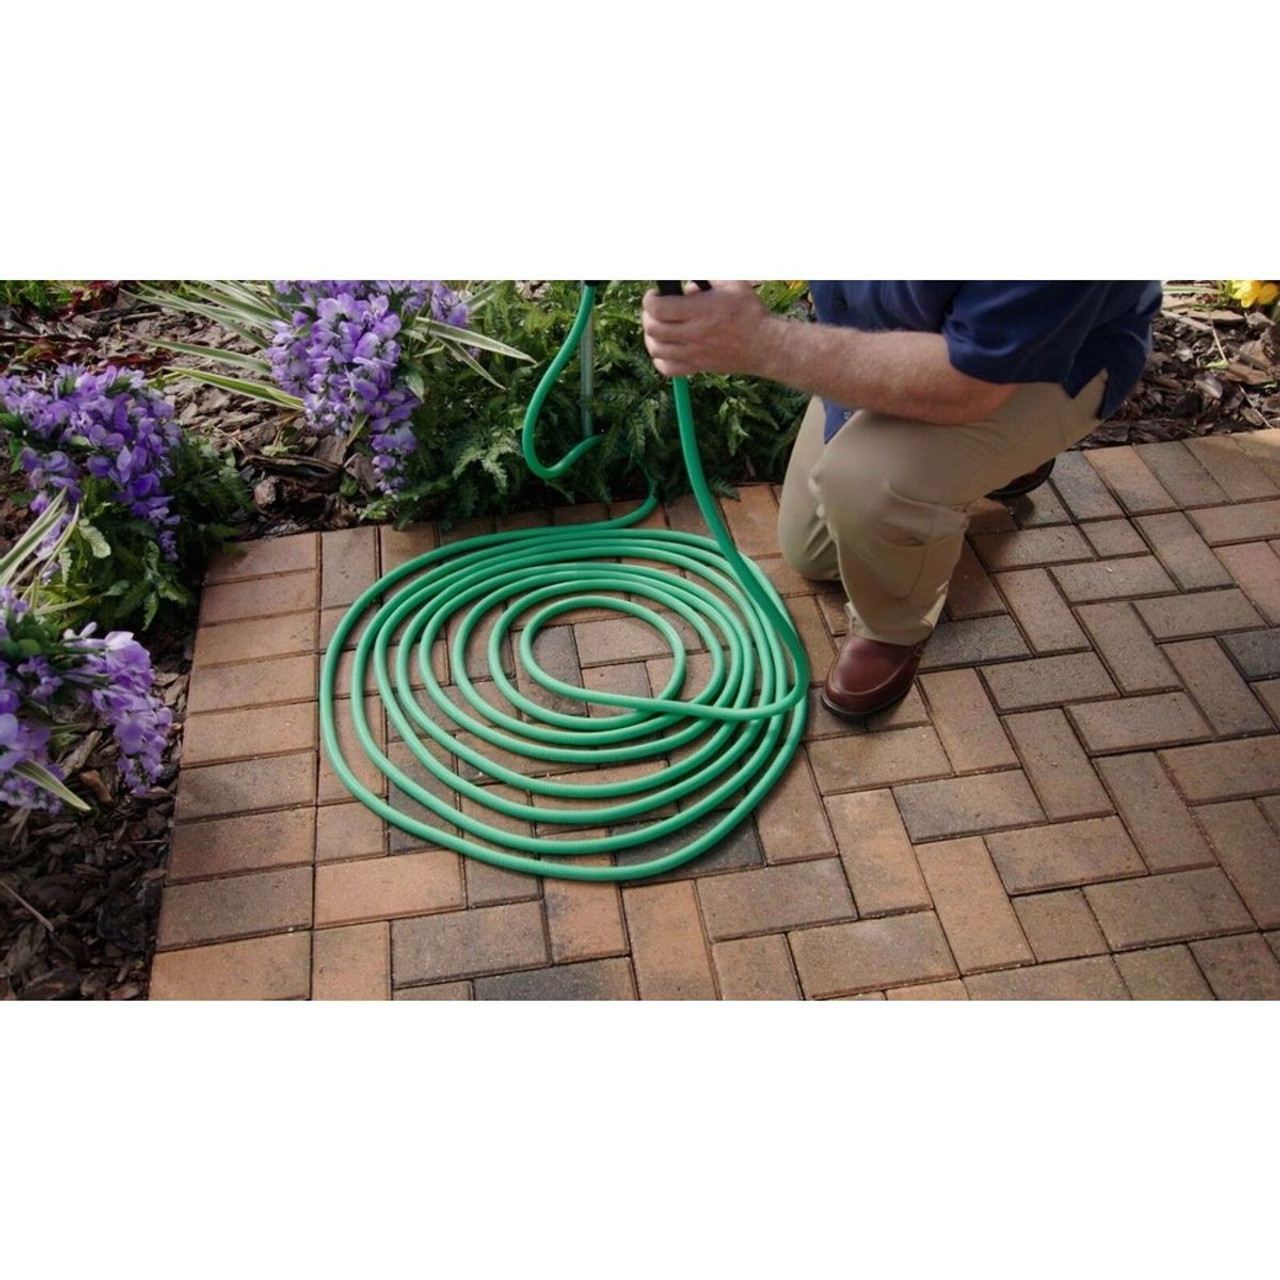 Lizard Hose - The Amazing Expandable Hose, 50- or 100-Foot, As Seen On TV product image